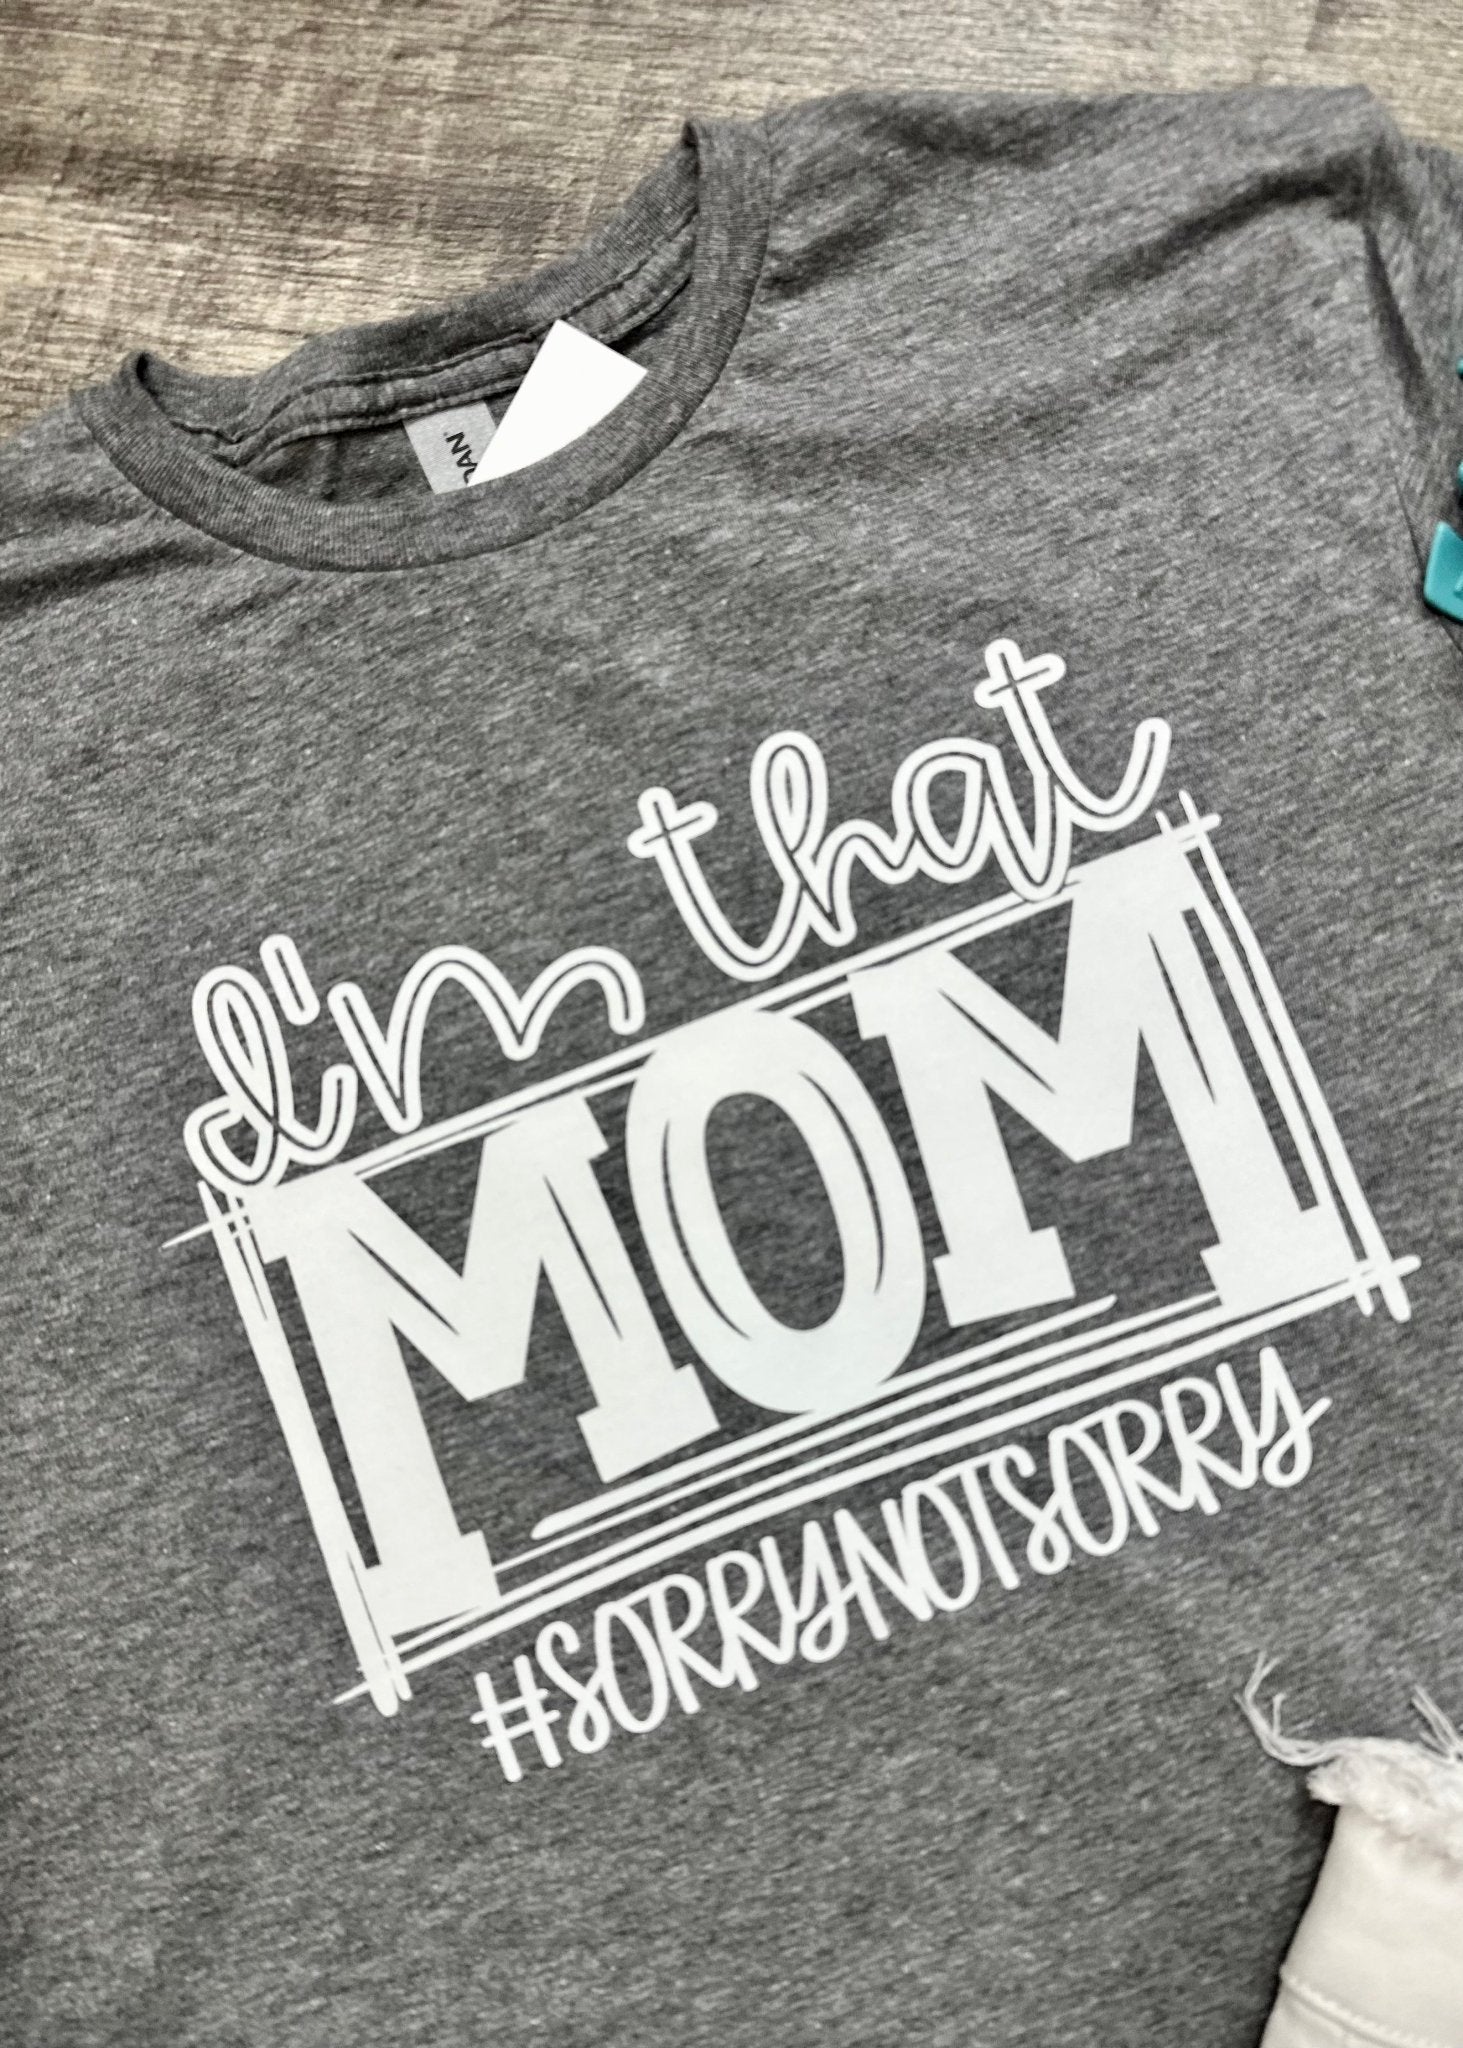 I’m That Mom Graphic Tee - Jimberly's Boutique